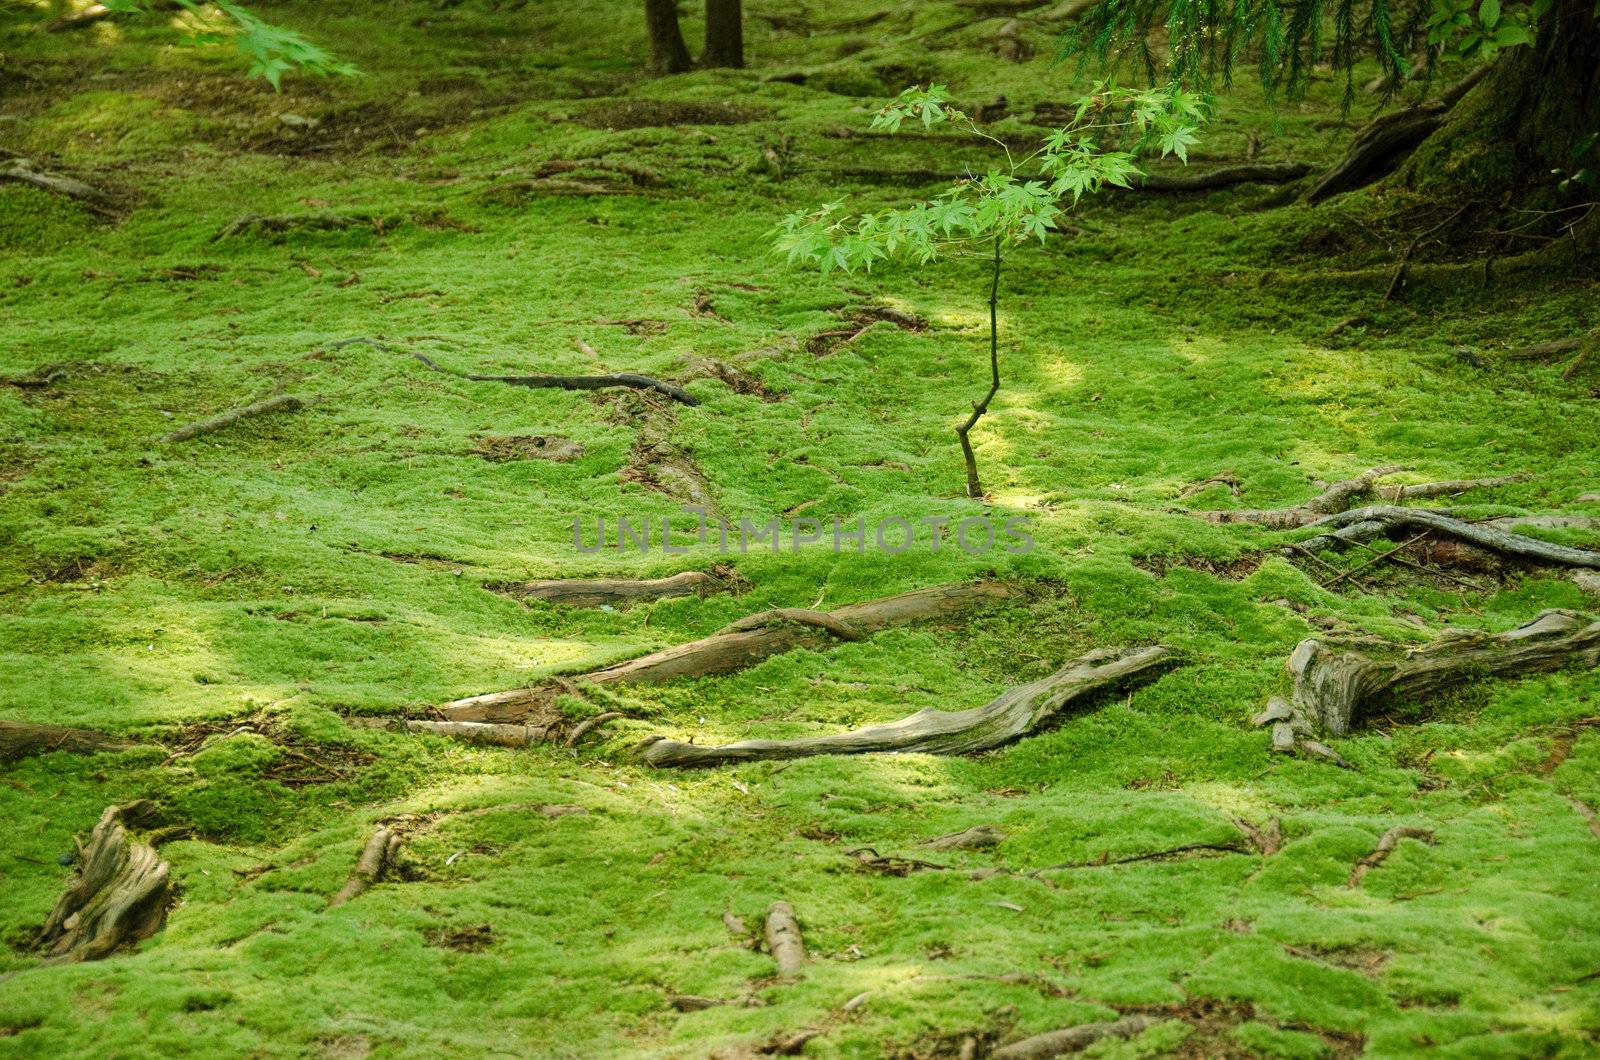 Carpet of green moss with roots from trees on a forest floor